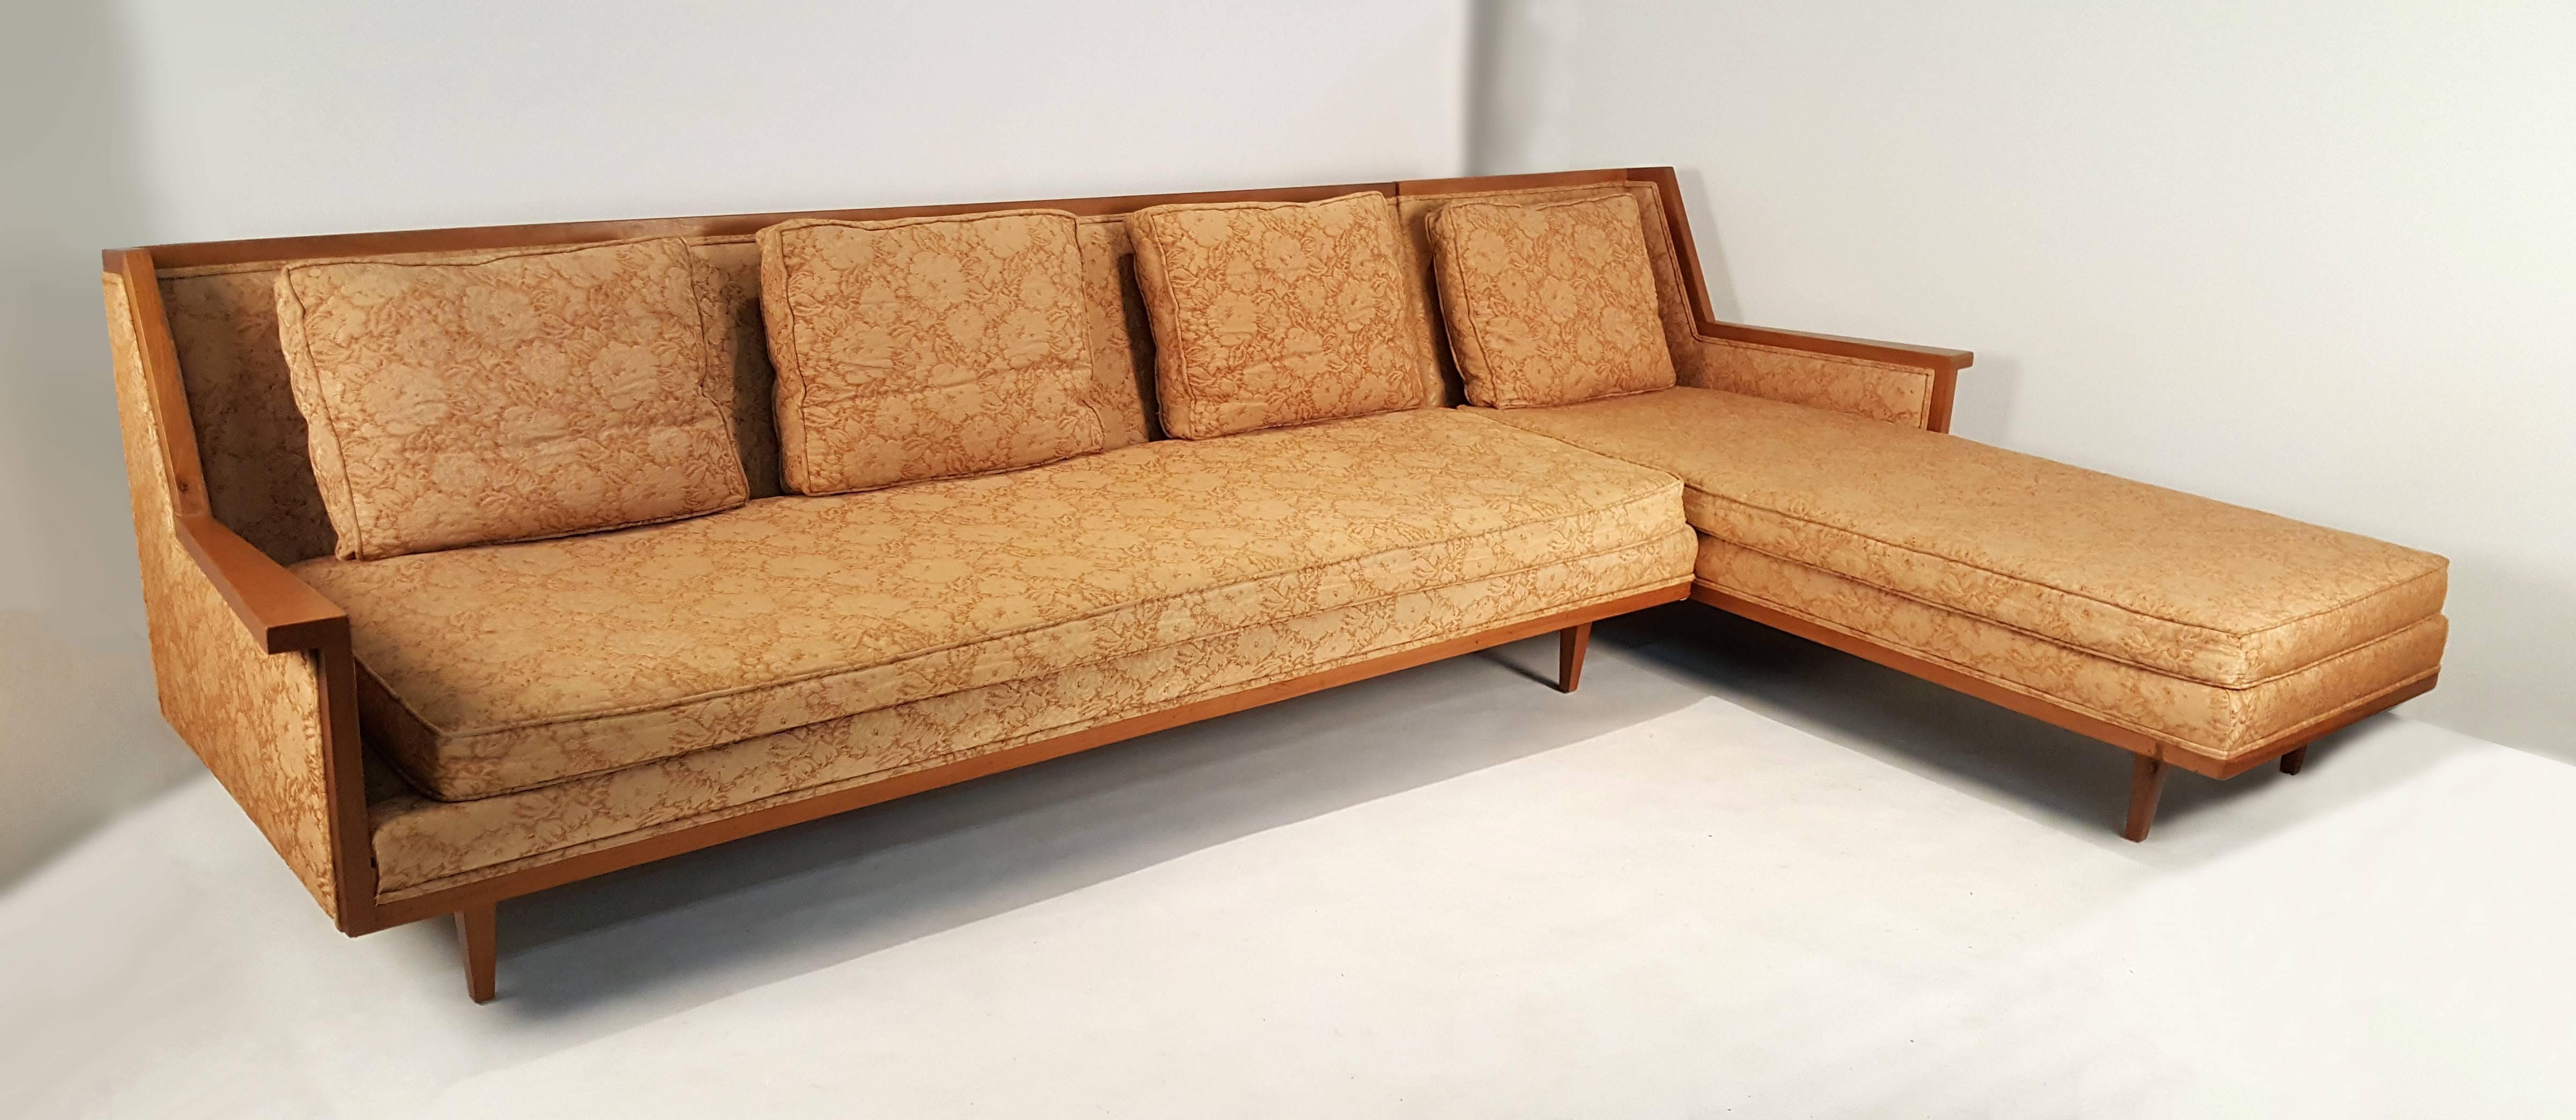 This sofa was manufactured by one of the most well-recognized names in furniture from the mid-century modern era, Widdicomb. The company was best known for their partnership with world-renown designer T.H. Robsjohn Gibbings. Many other great